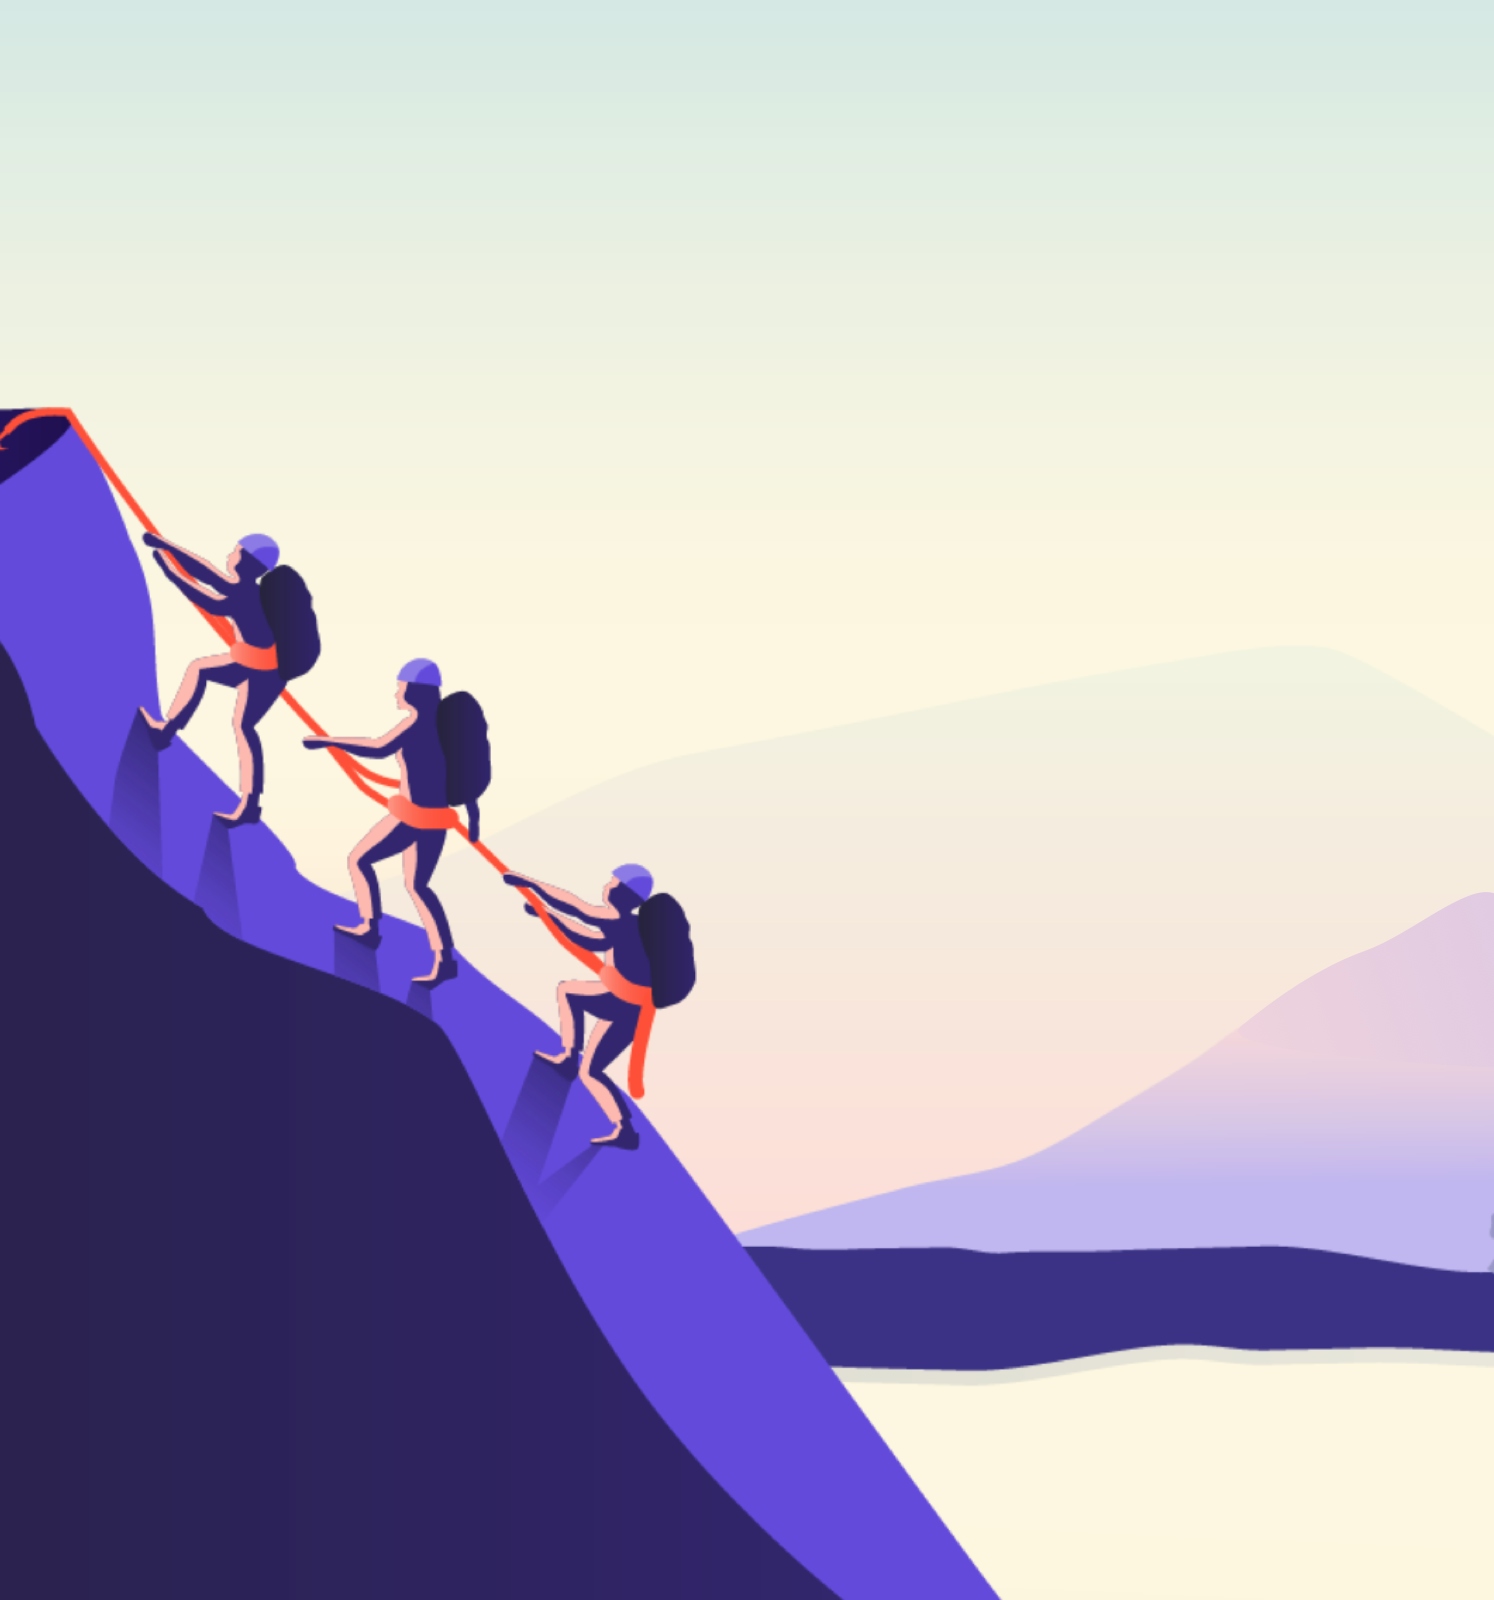 Three illustrated figures scale a mountain in Dayshape’s colour palette